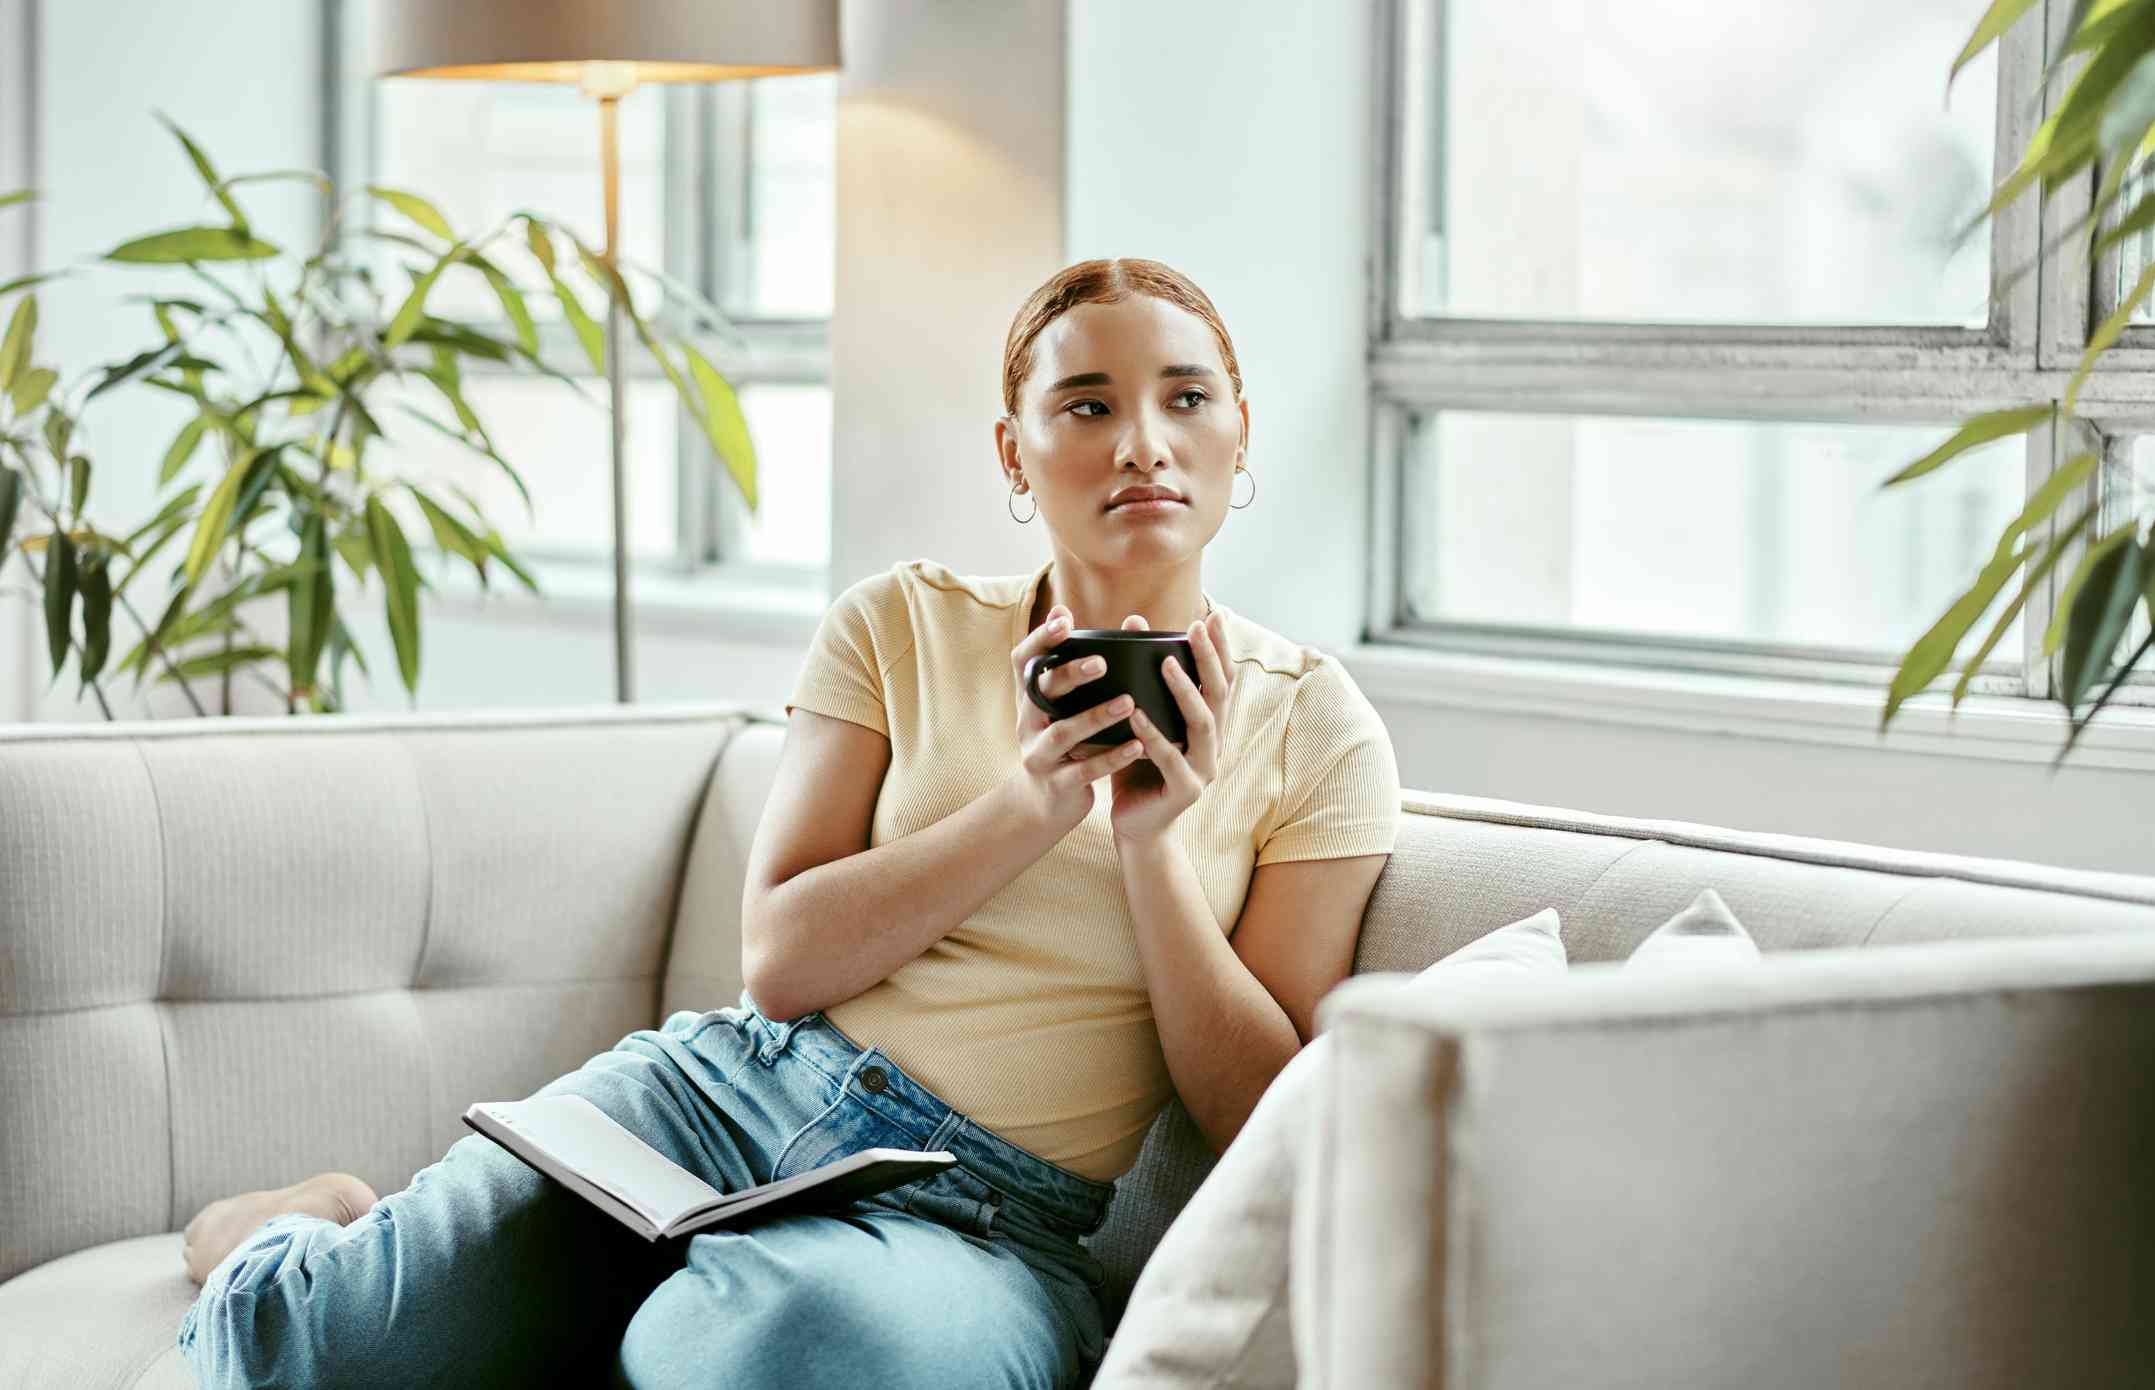 A woman in a yellow shirt sits on the couch with a coffe mug in her hands and a book open in her lap as she gazes off sadly.